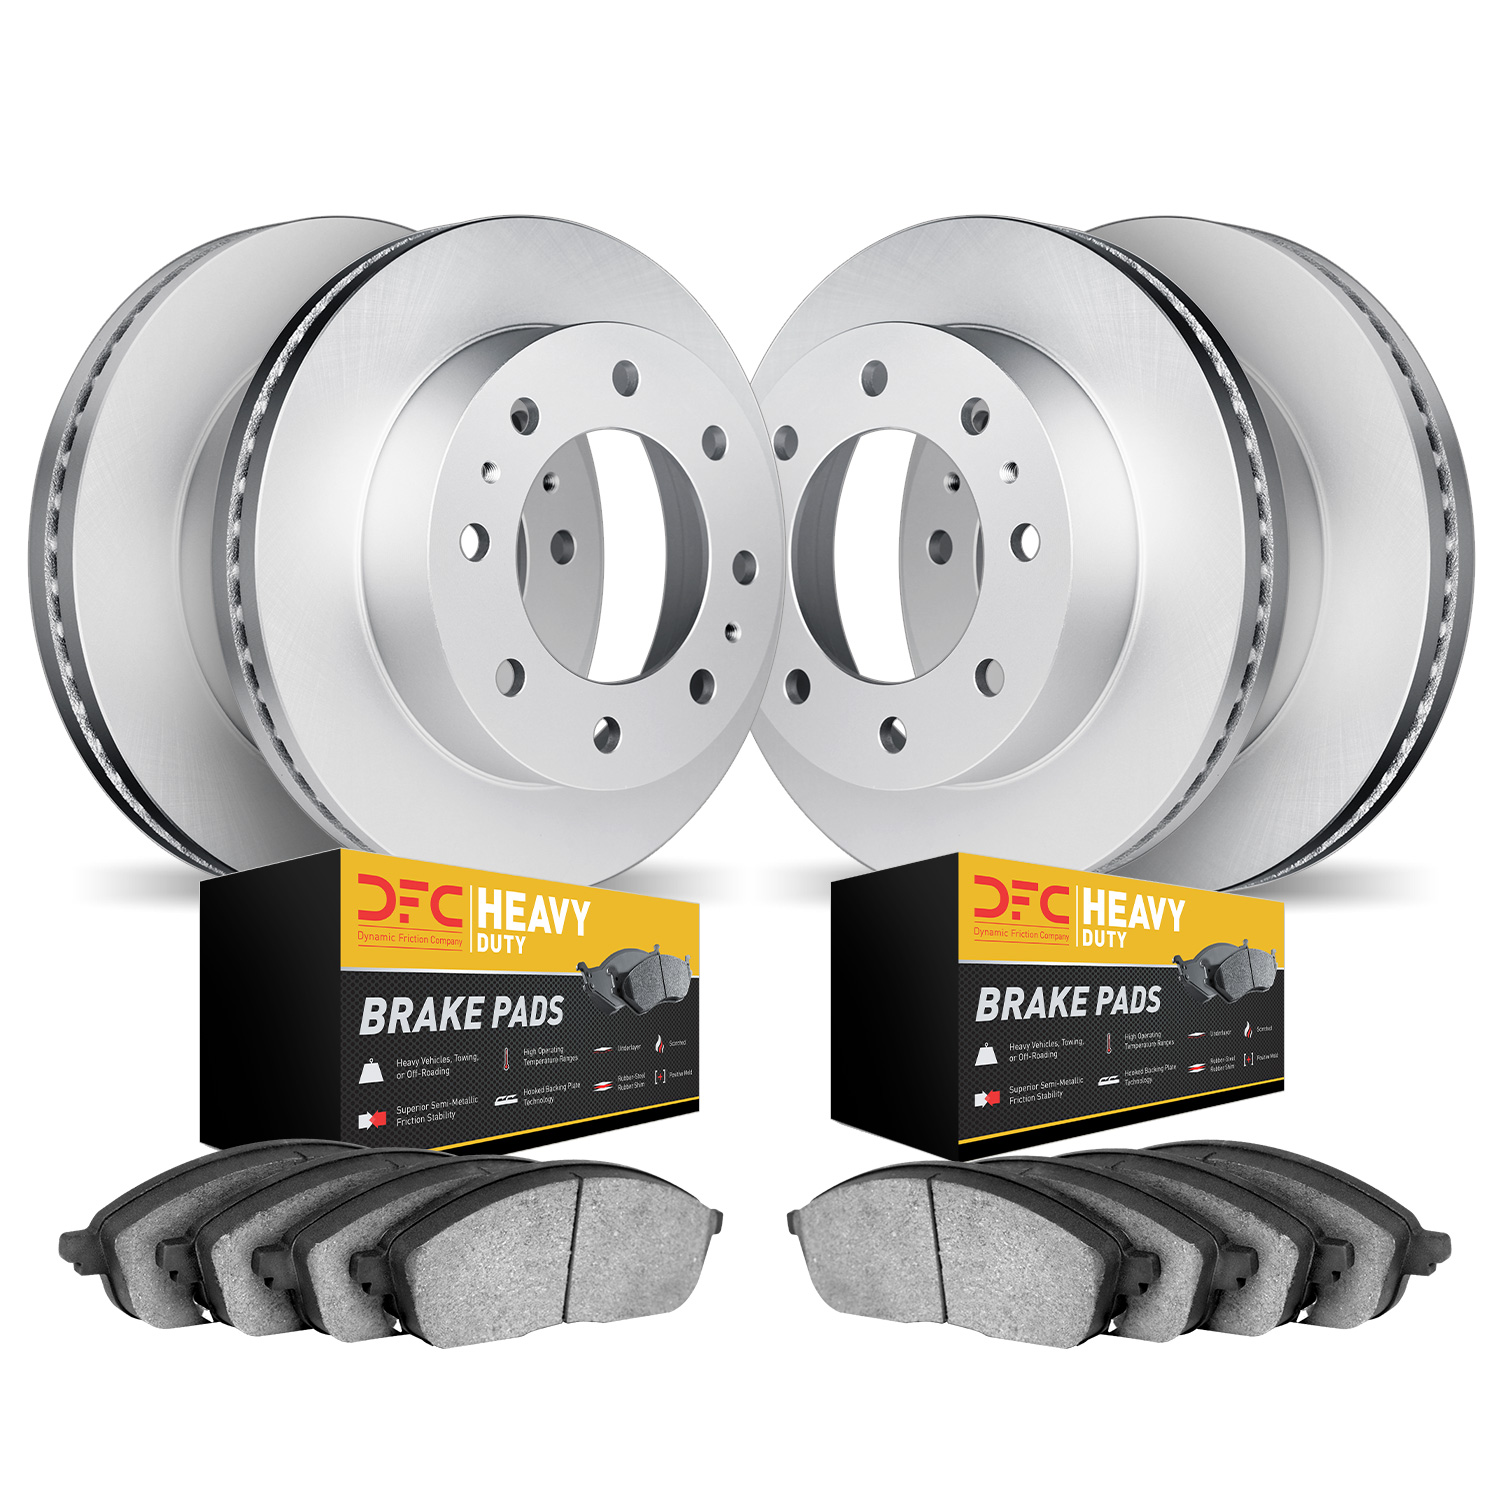 4204-54066 Geospec Brake Rotors w/Heavy-Duty Brake Pads Kit, Fits Select Ford/Lincoln/Mercury/Mazda, Position: Front and Rear